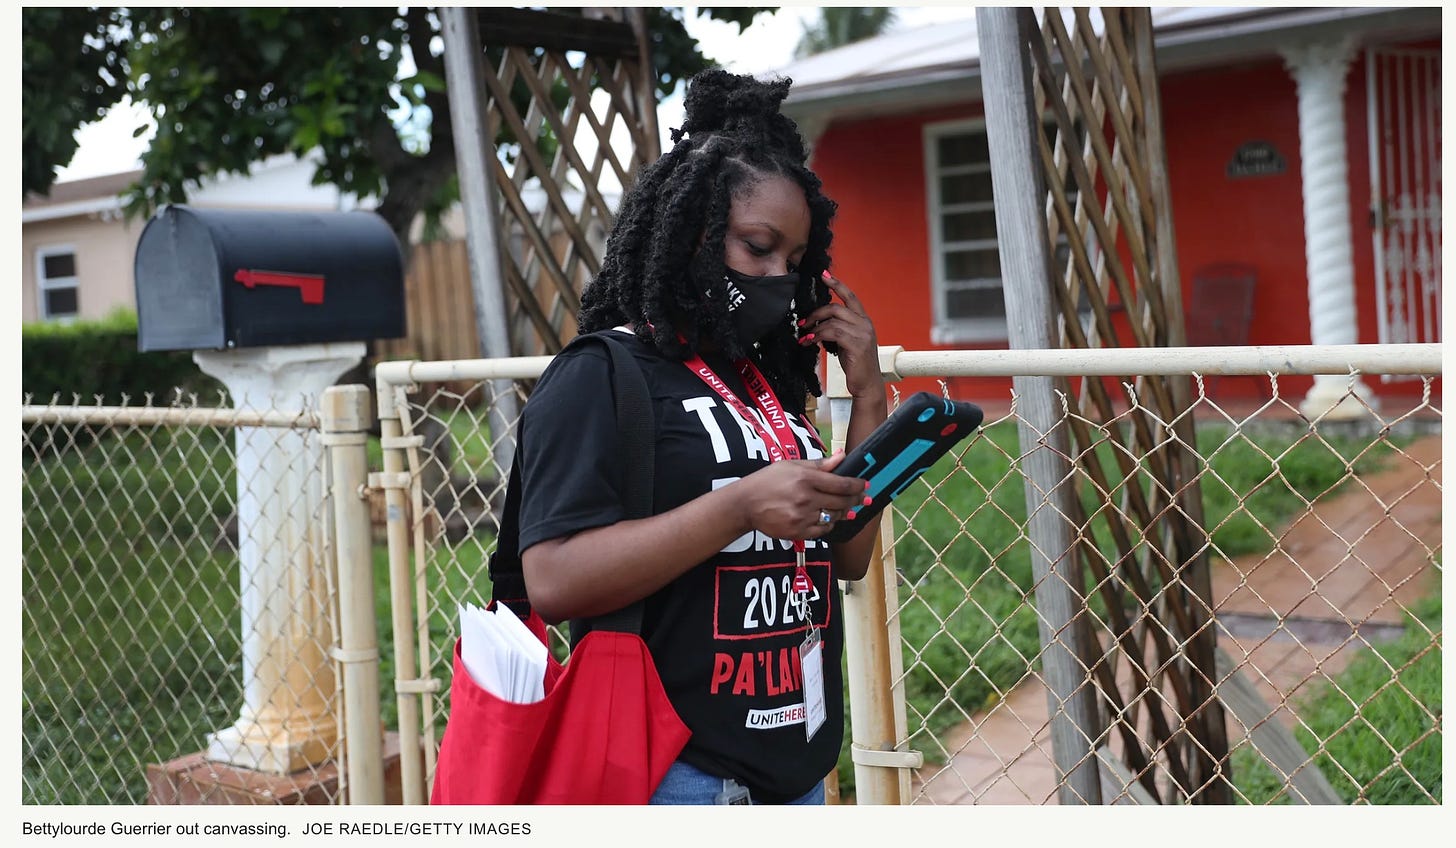 Image from https://www.teenvogue.com/story/unite-here-take-back-2020-campaign-canvassers-bettylourde-guerrier-florida